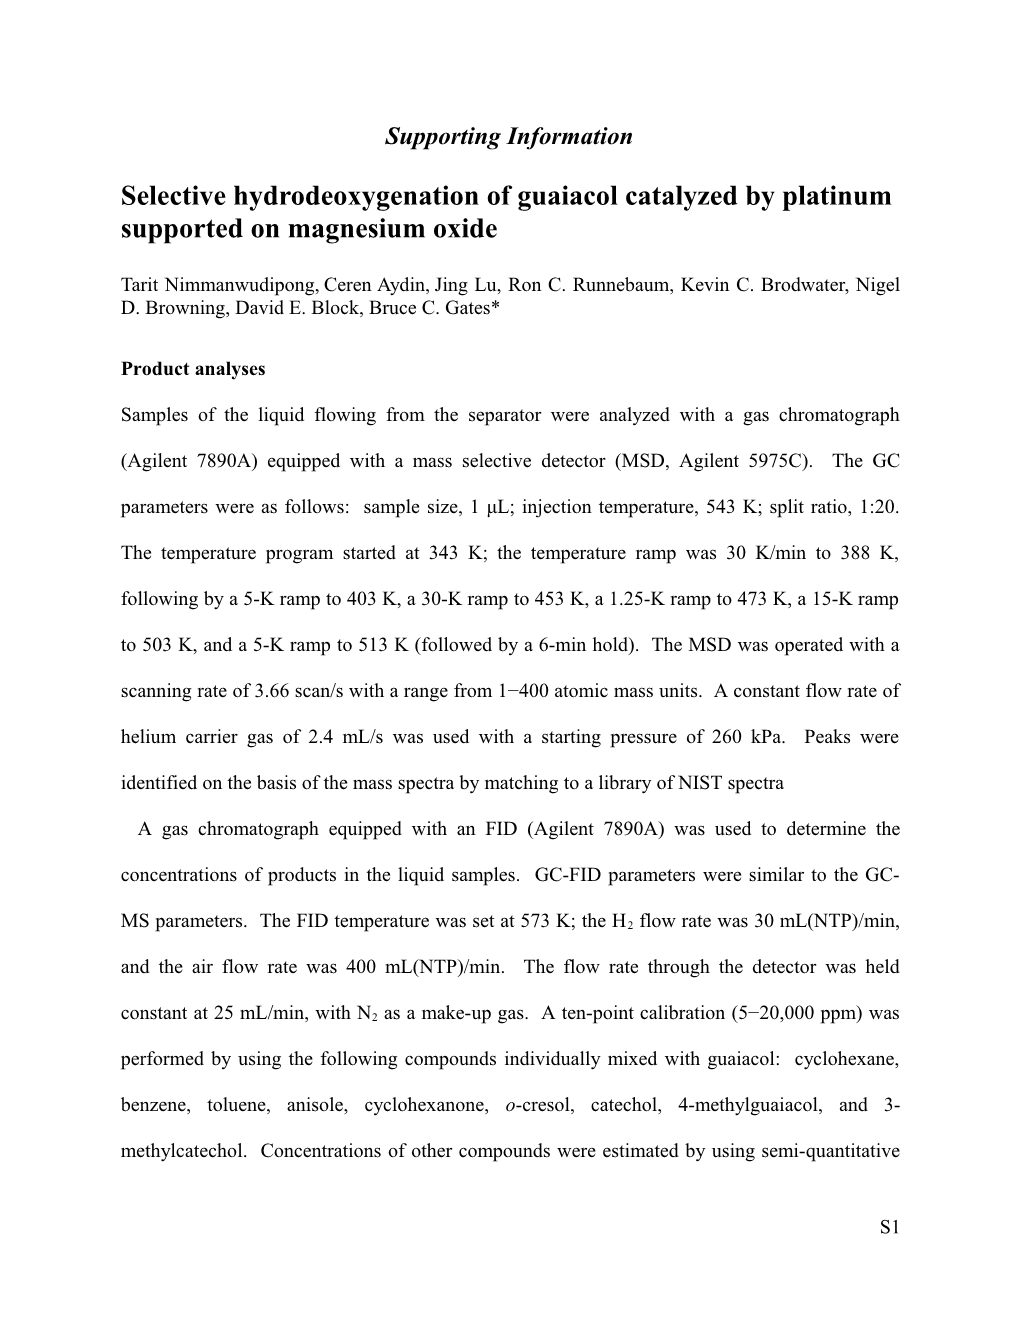 Selective Hydrodeoxygenation of Guaiacol Catalyzed by Platinum Supported on Magnesium Oxide